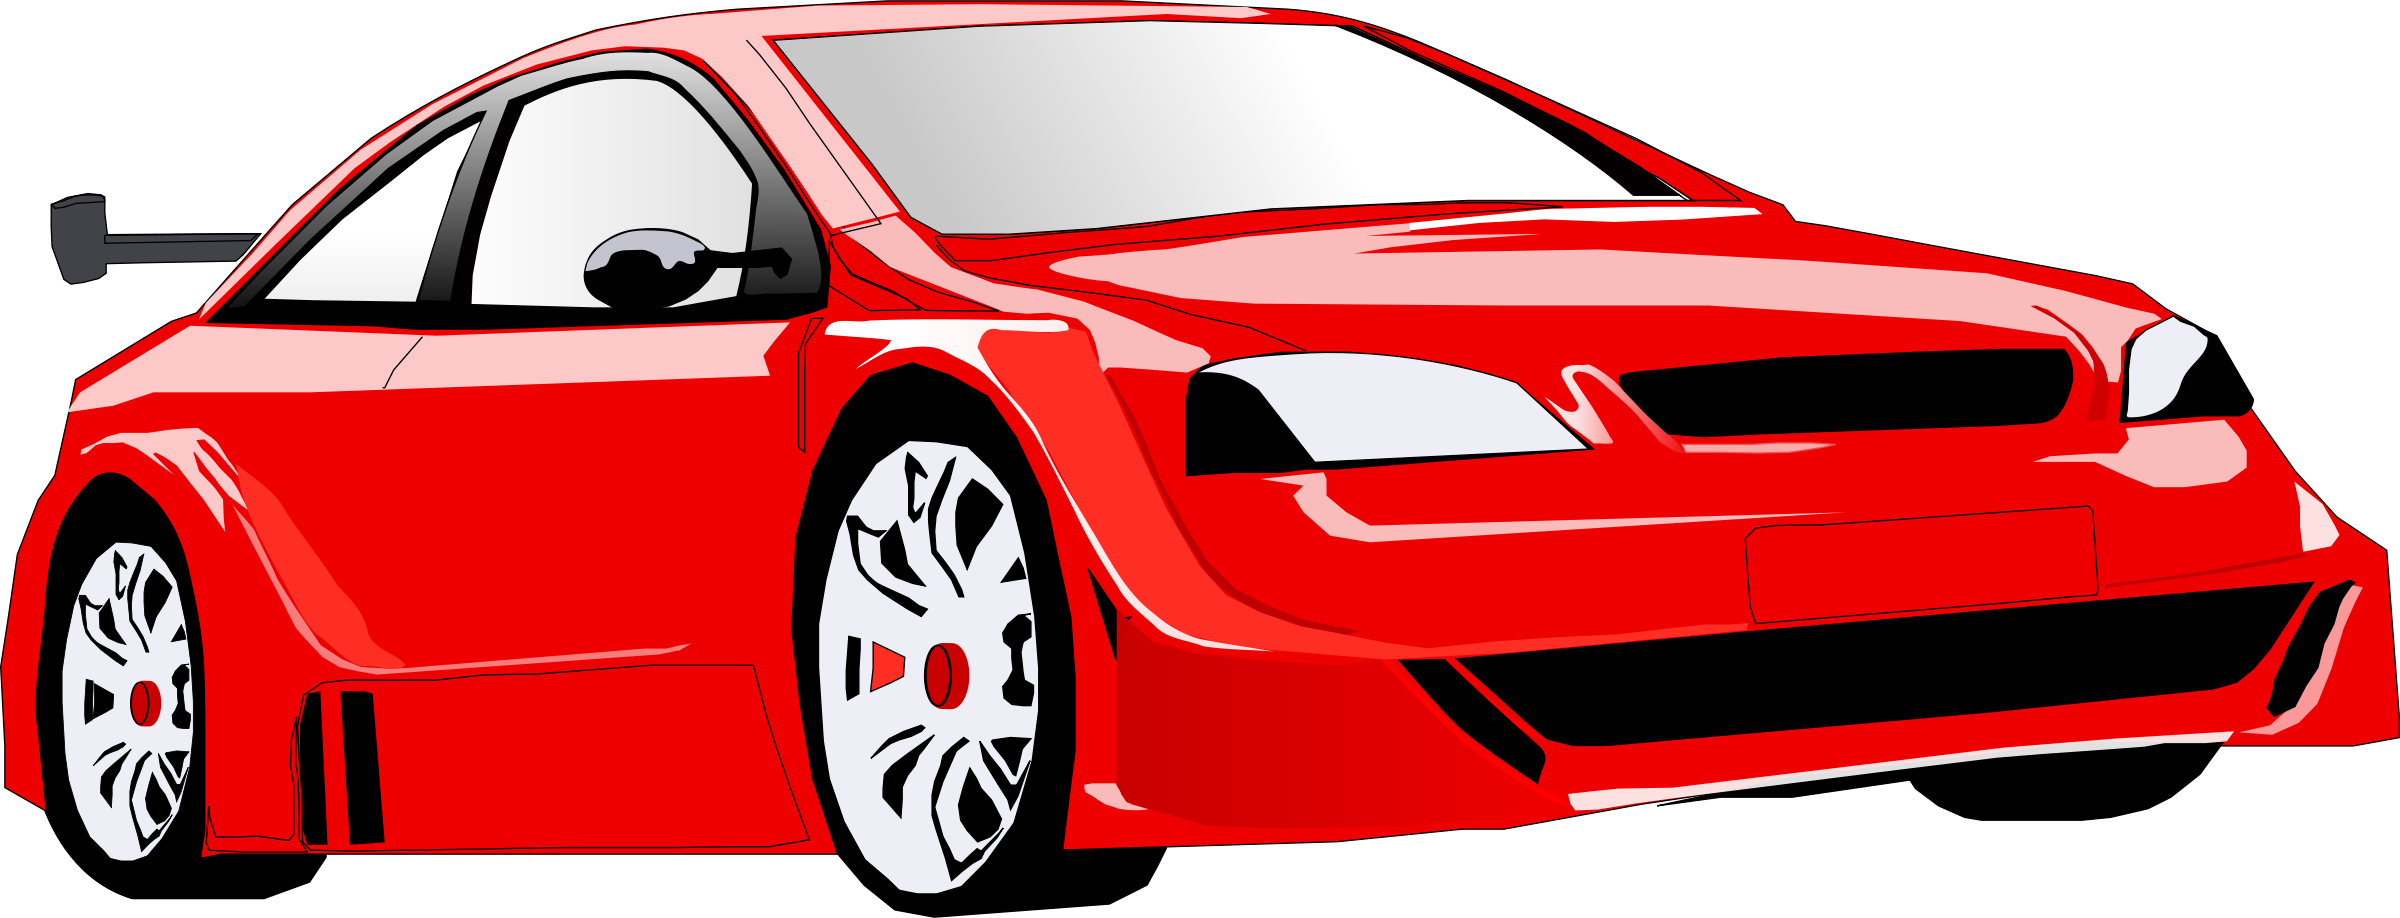 Cars car clipart free large images